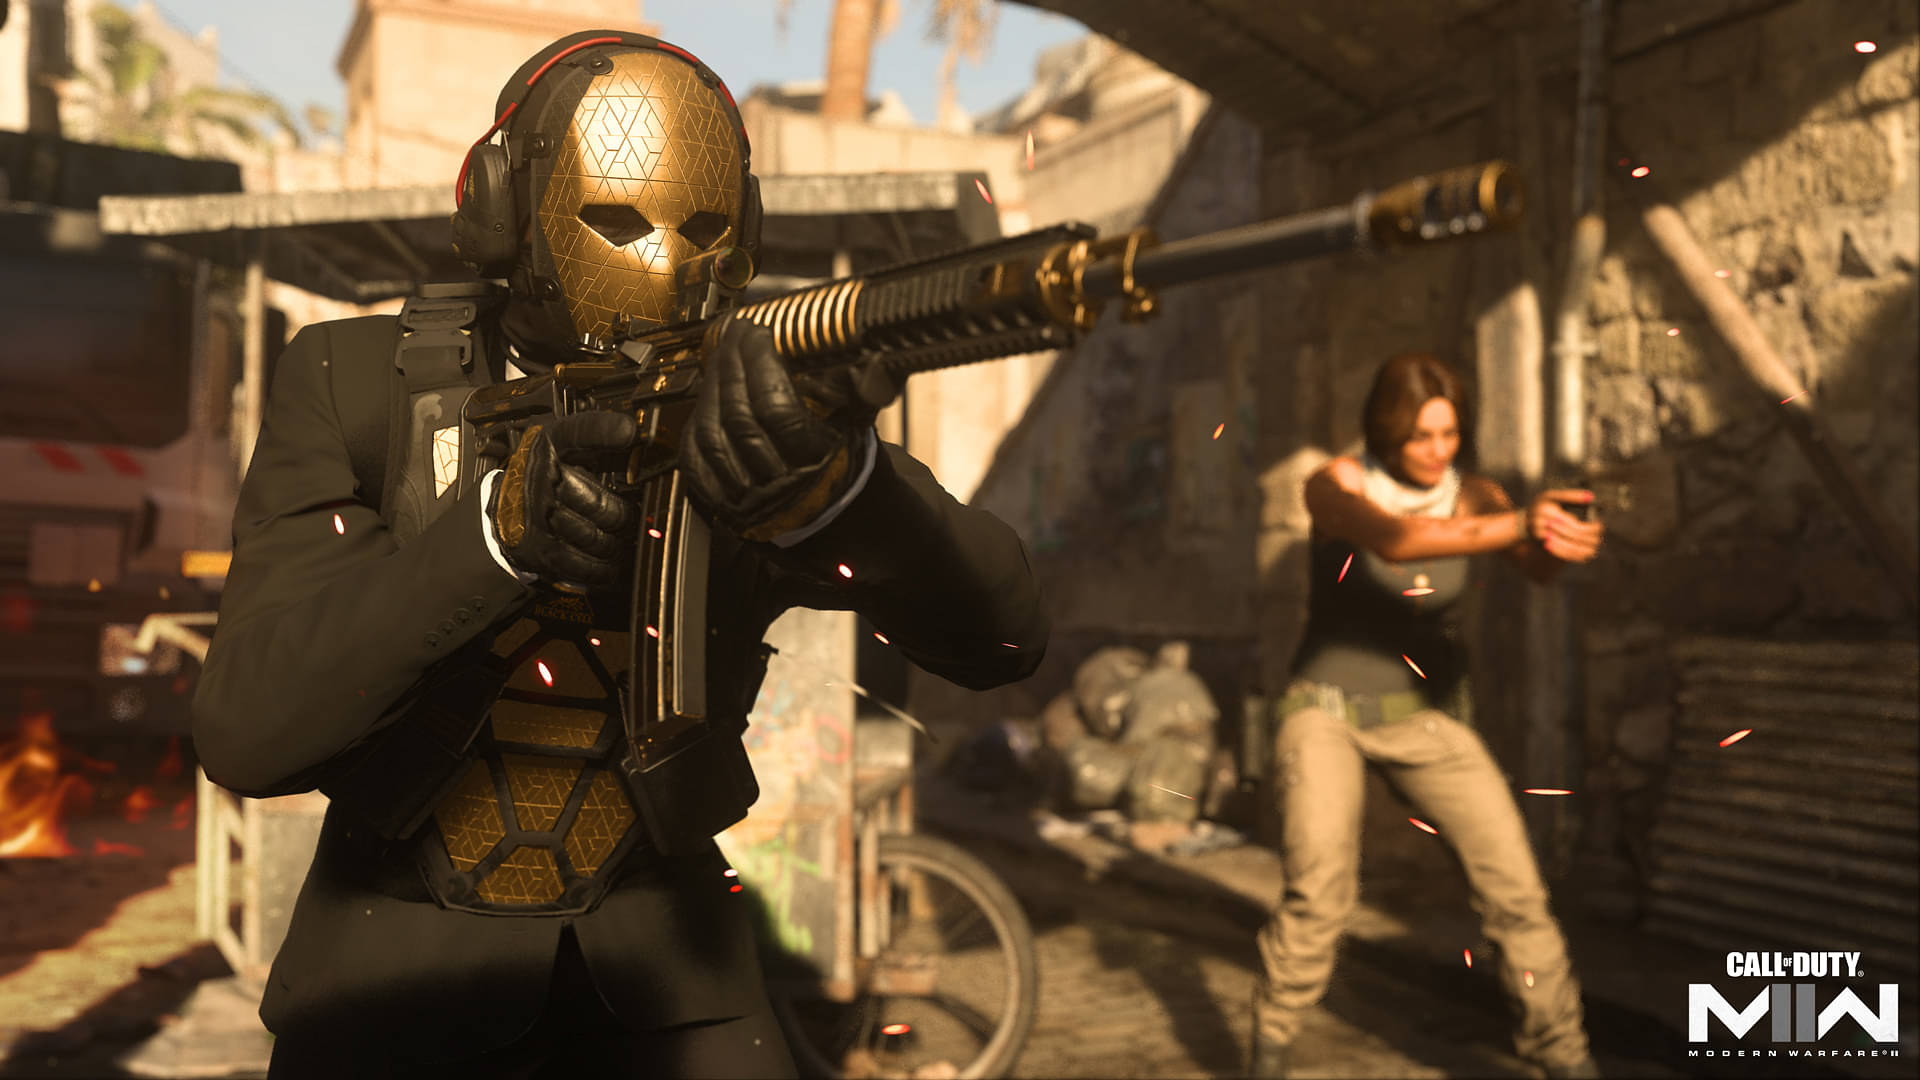 An image of multiple soldiers in Action in Warzone 2